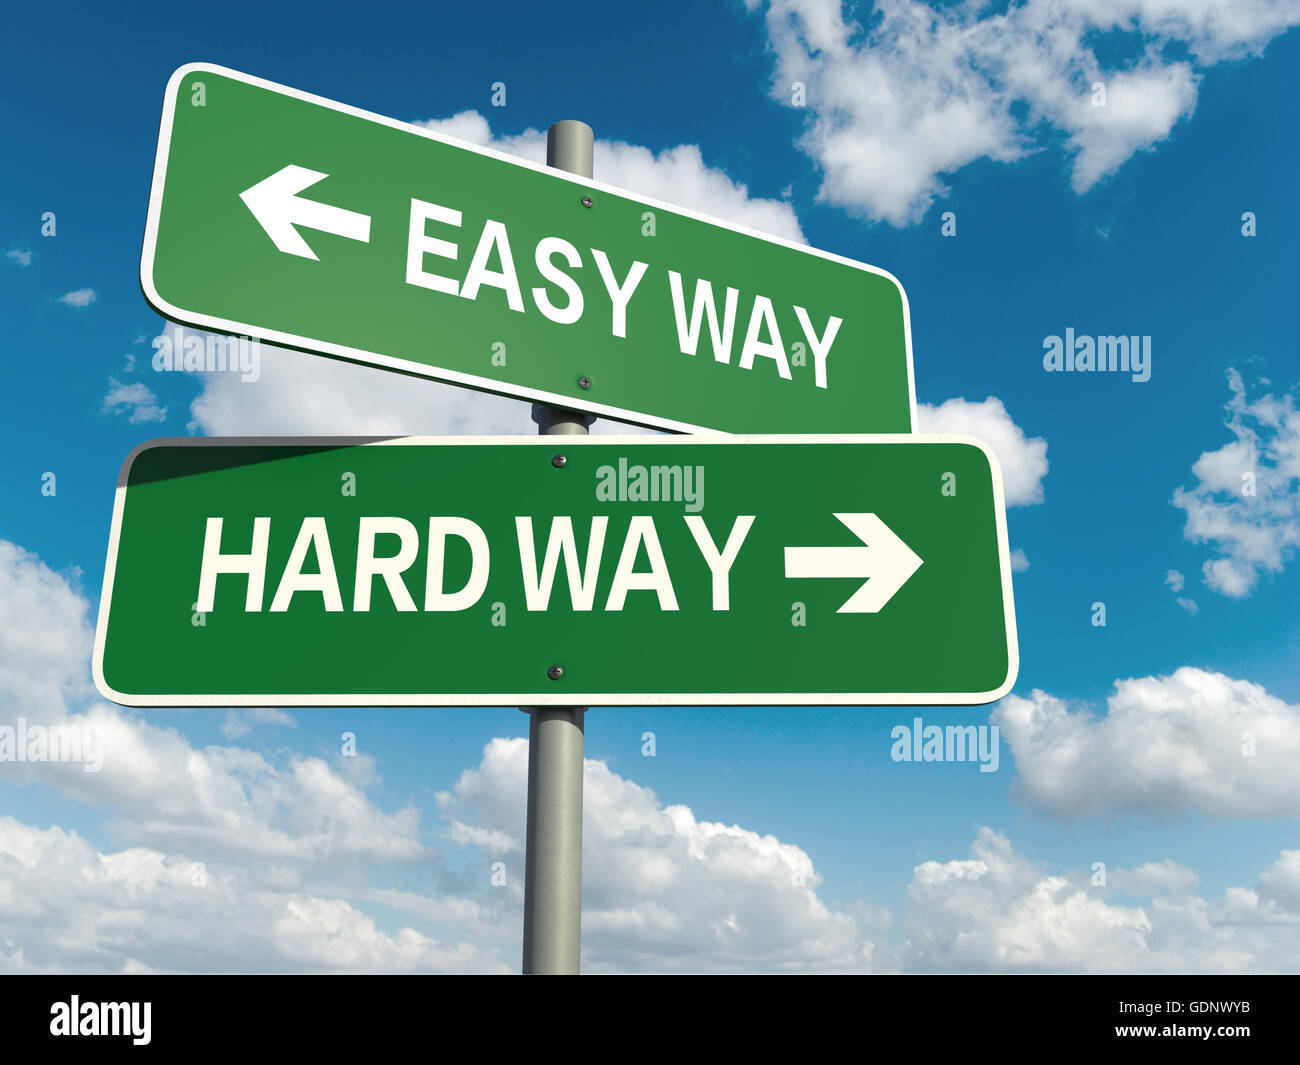 A road sign with easy way hard way words on sky background Stock Photo